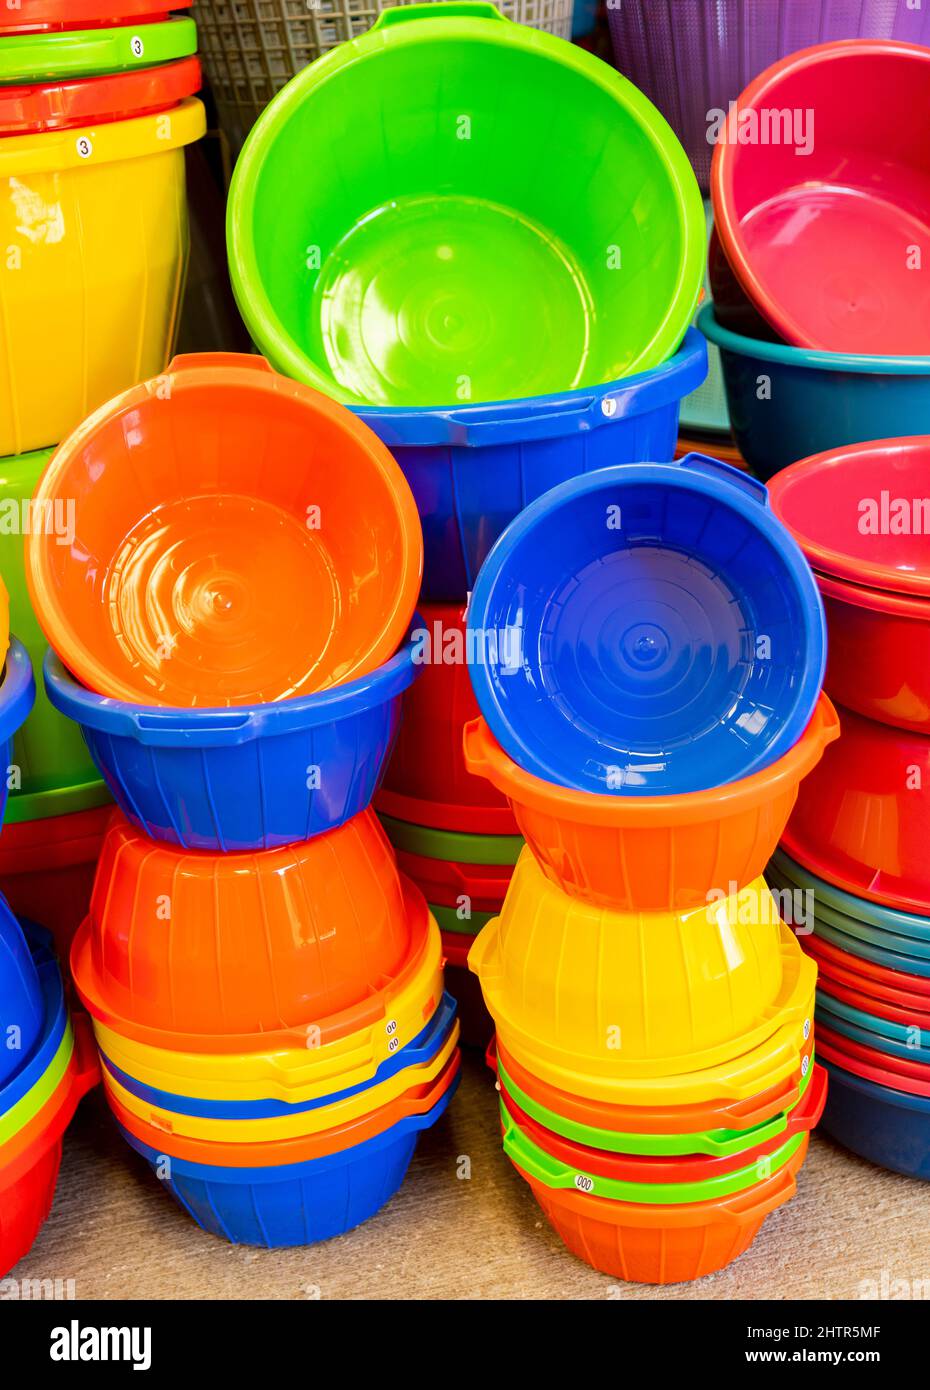 A collection of colourful plastic baskets for sale in a market place Stock Photo